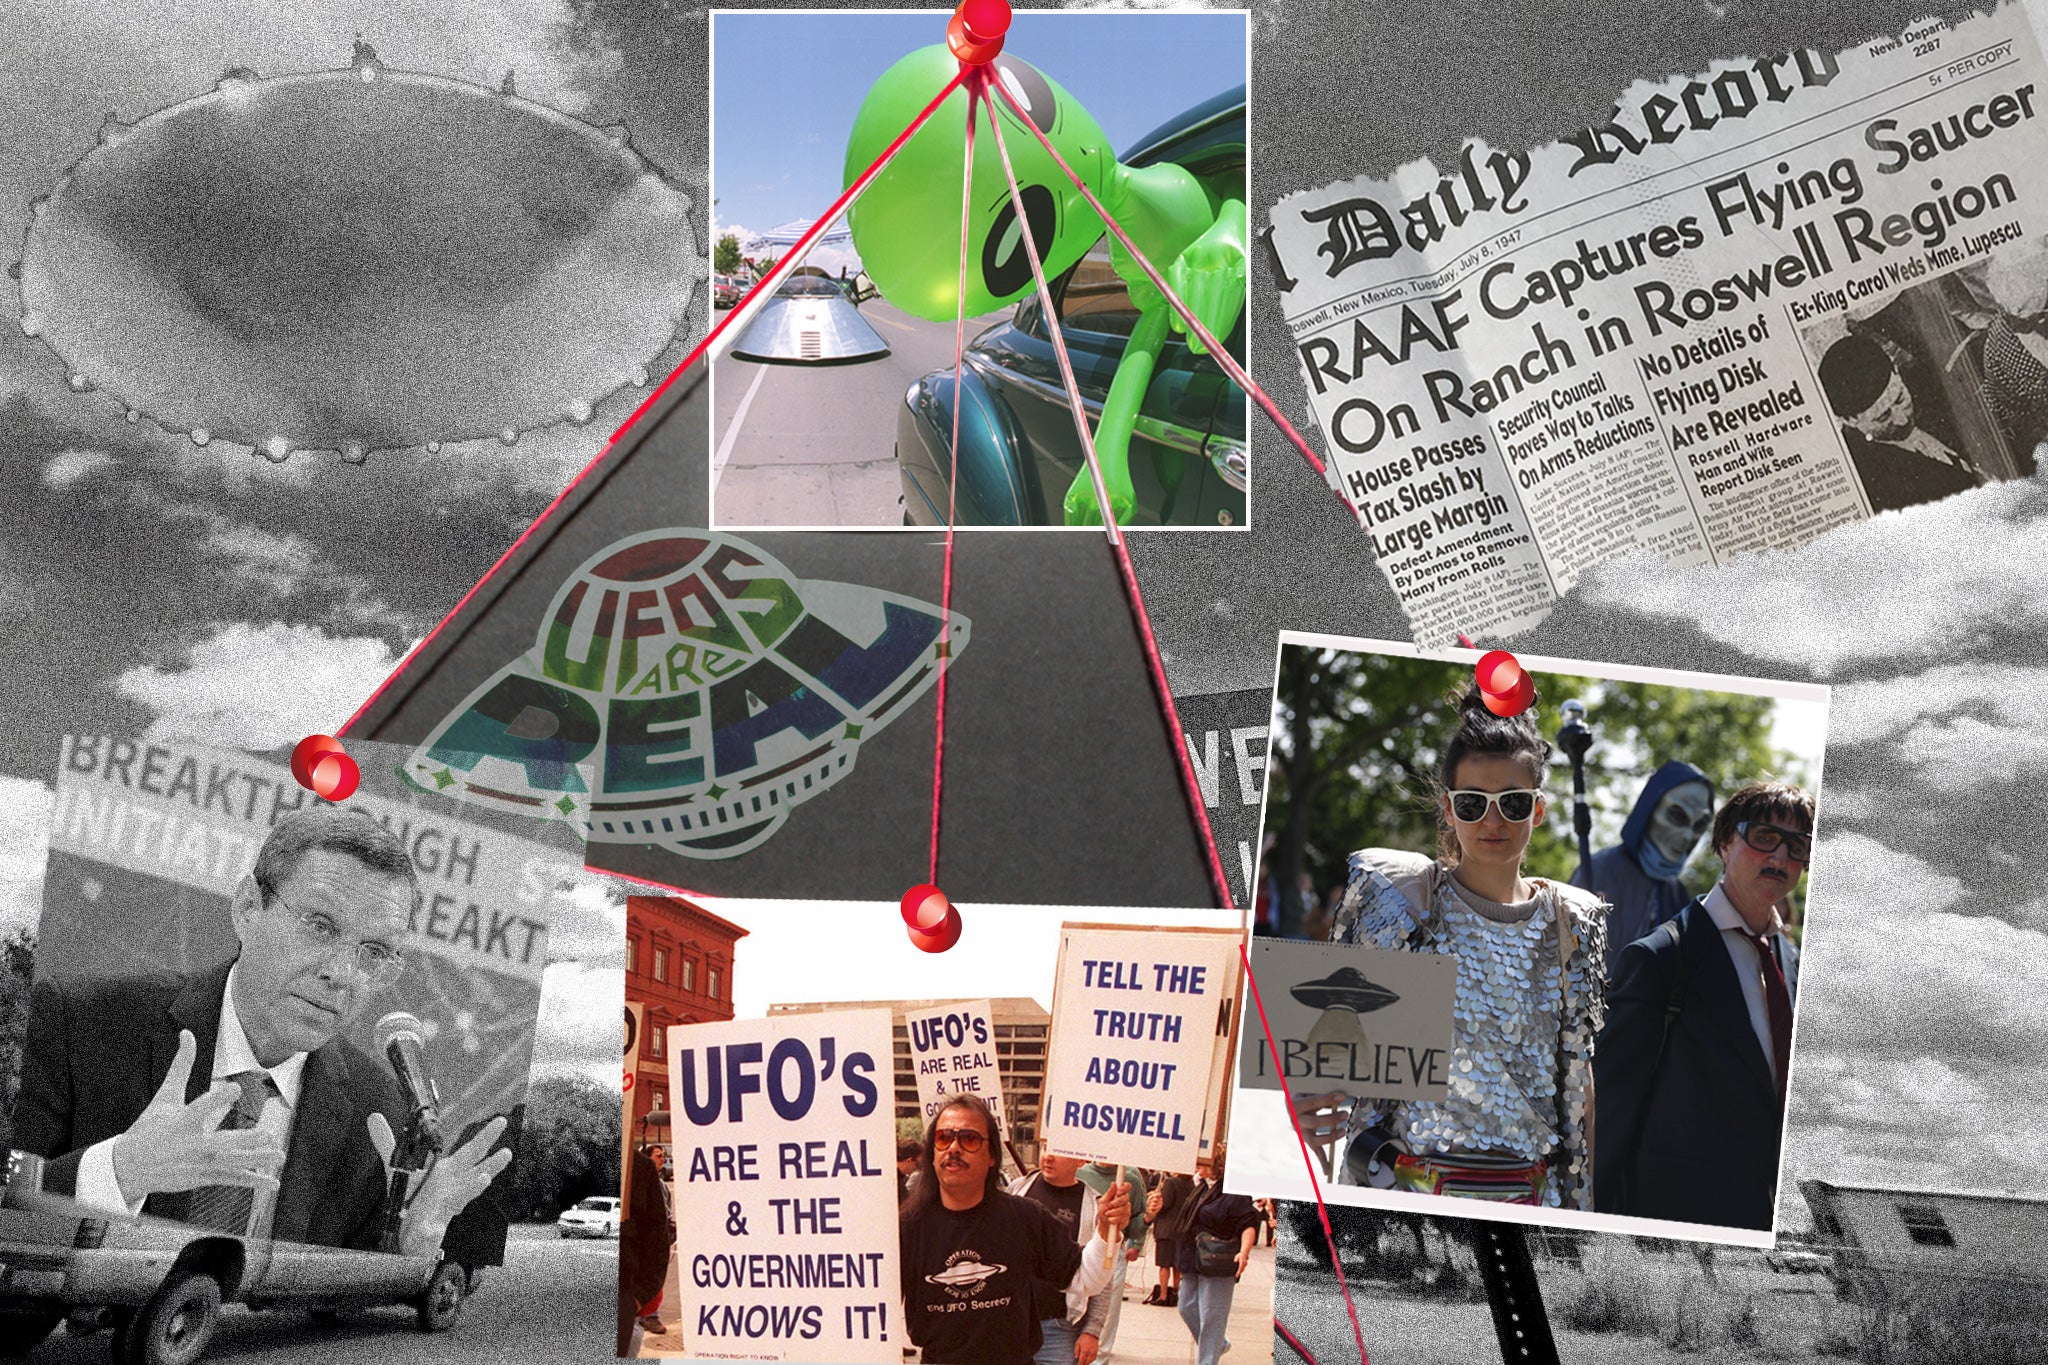 Belief in UFOs has been gaining a surprising number of adherents lately, including newspaper columnists